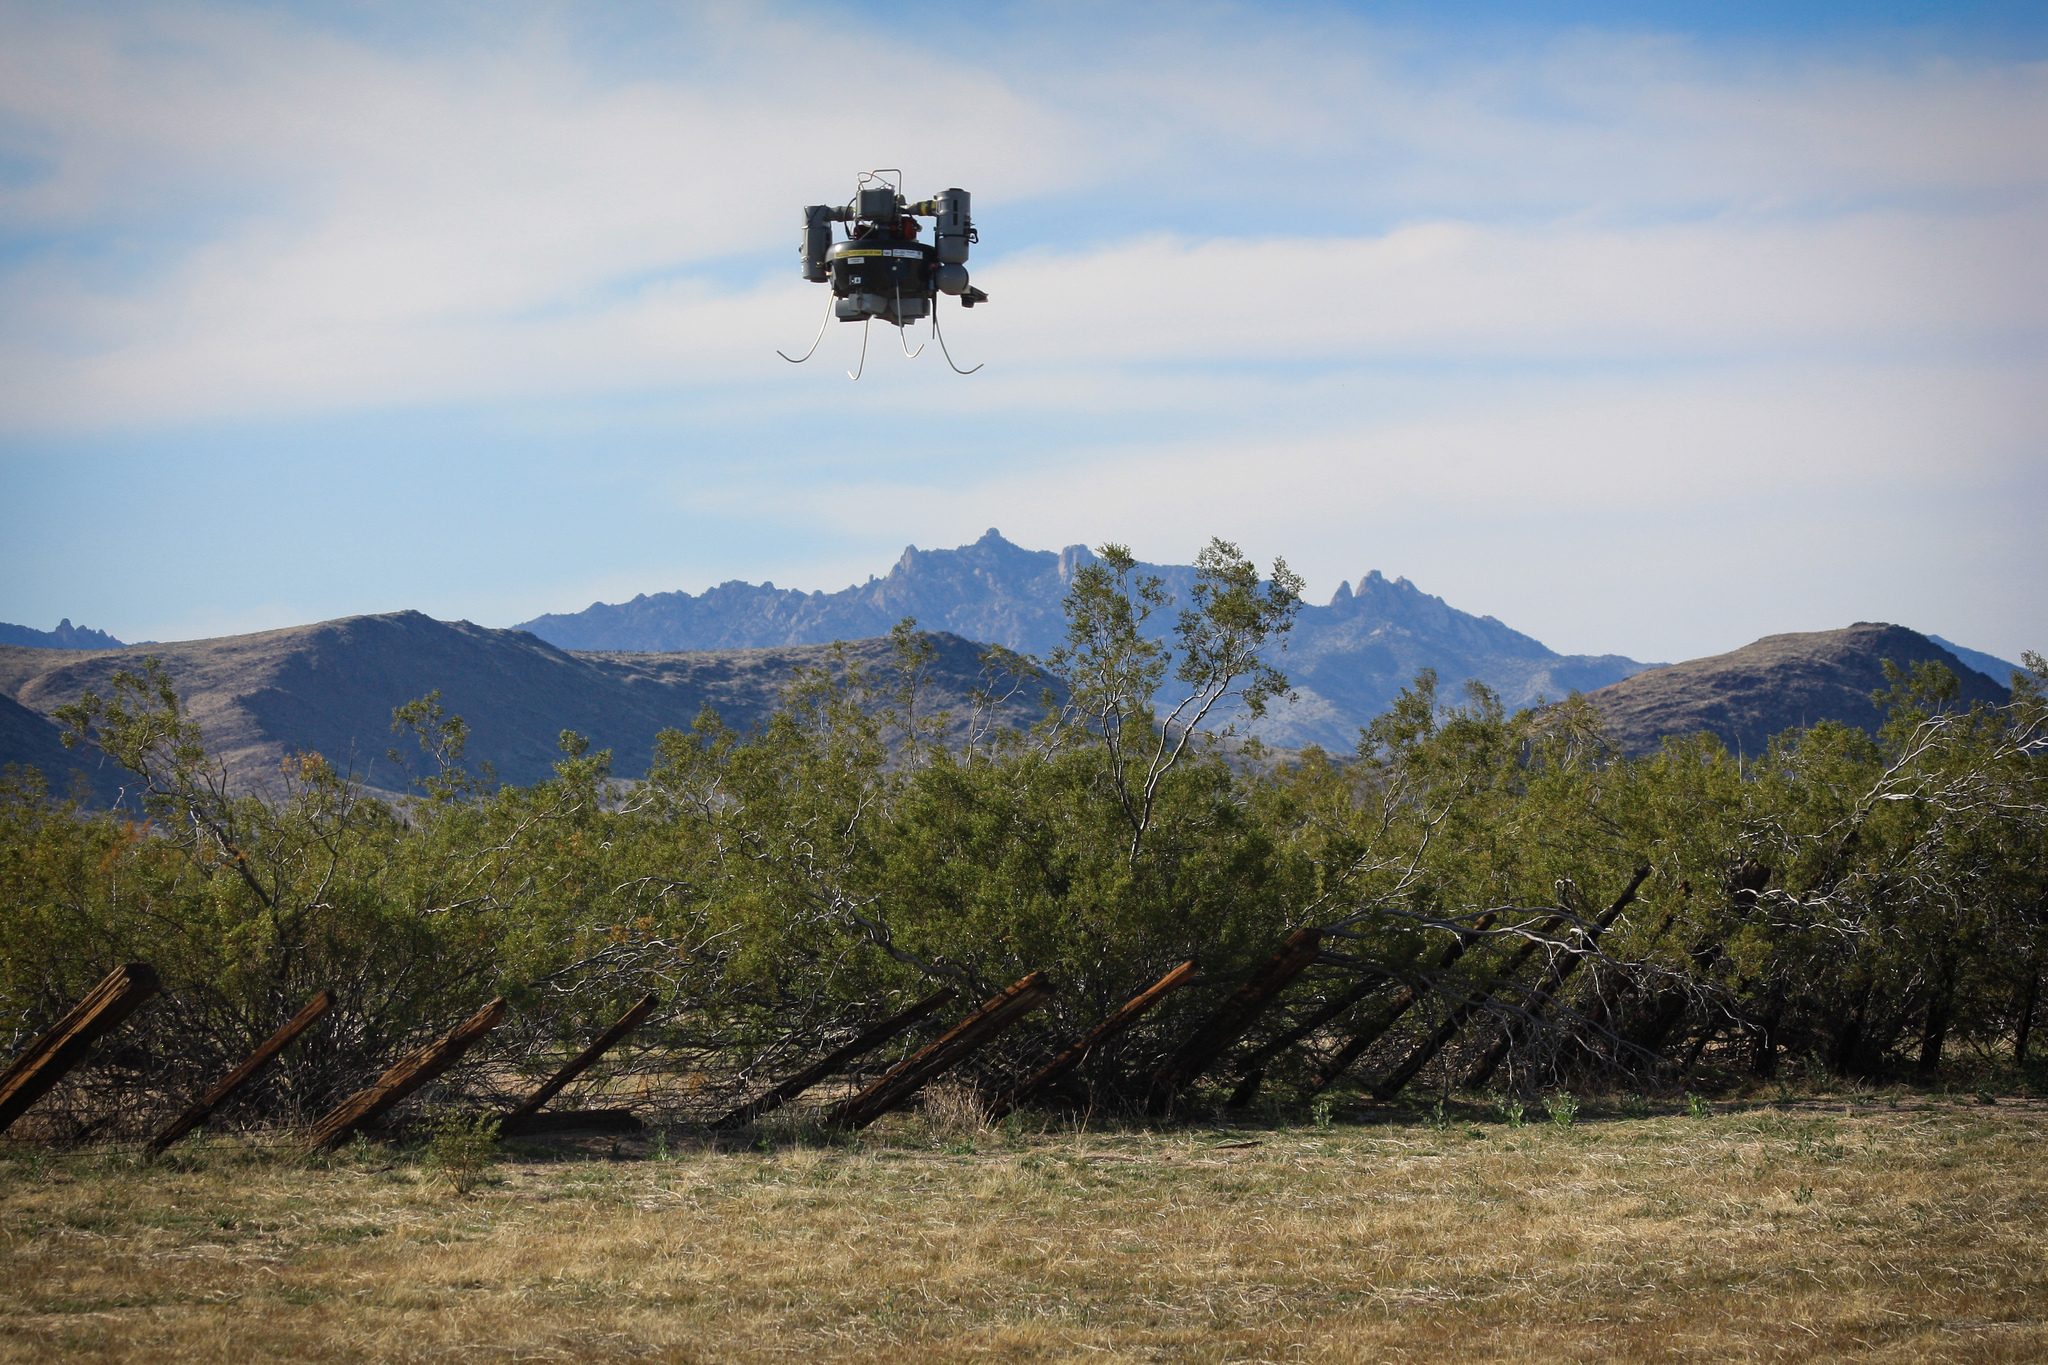 Image of a drone in Mojave, CA.